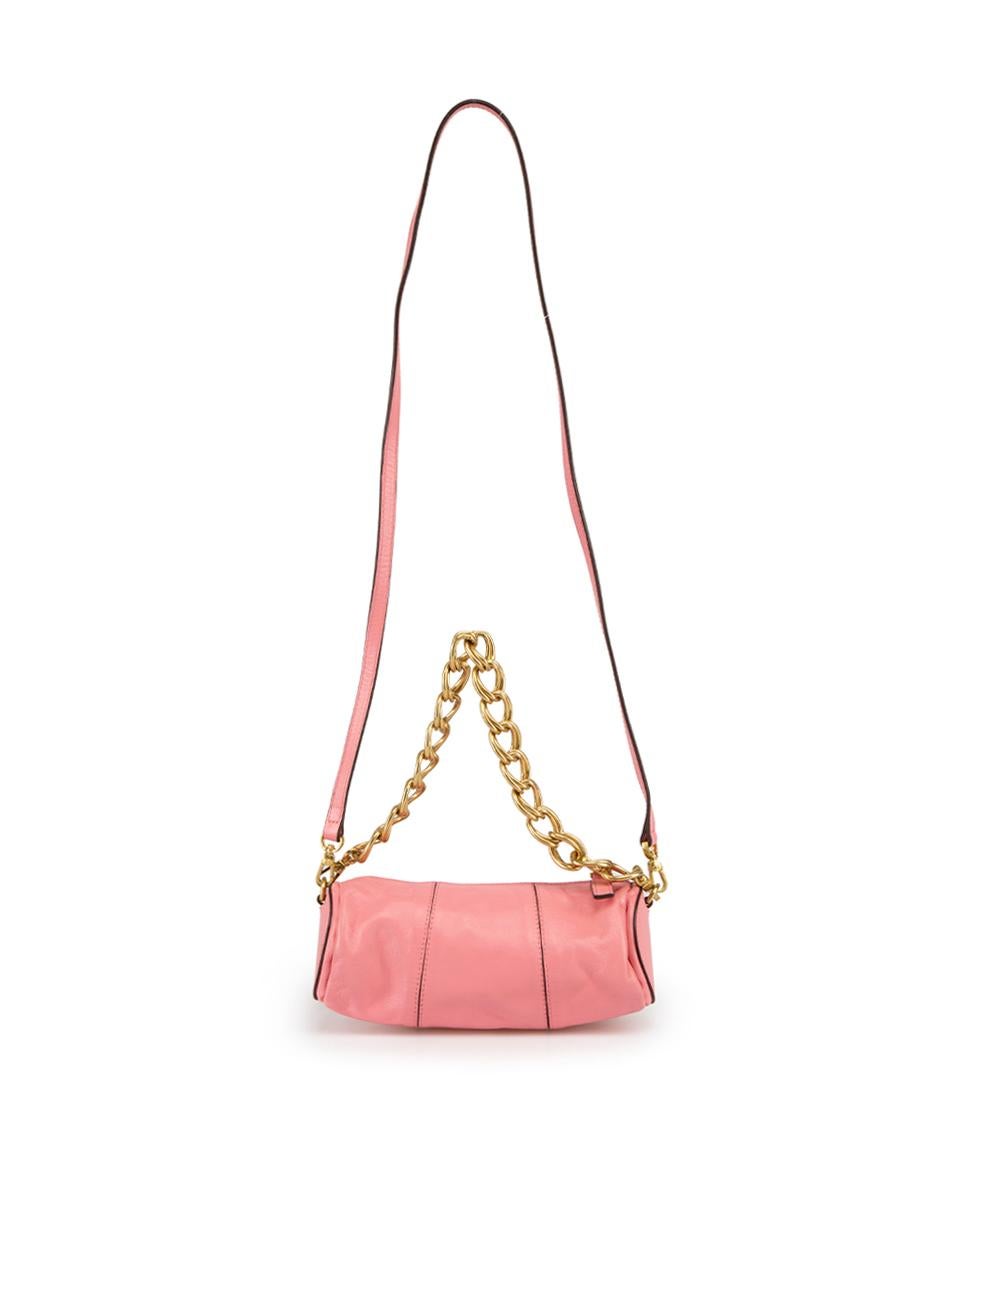 Manu Atelier Pink Mini Cylinder Convertible Bag In Excellent Condition For Sale In London, GB